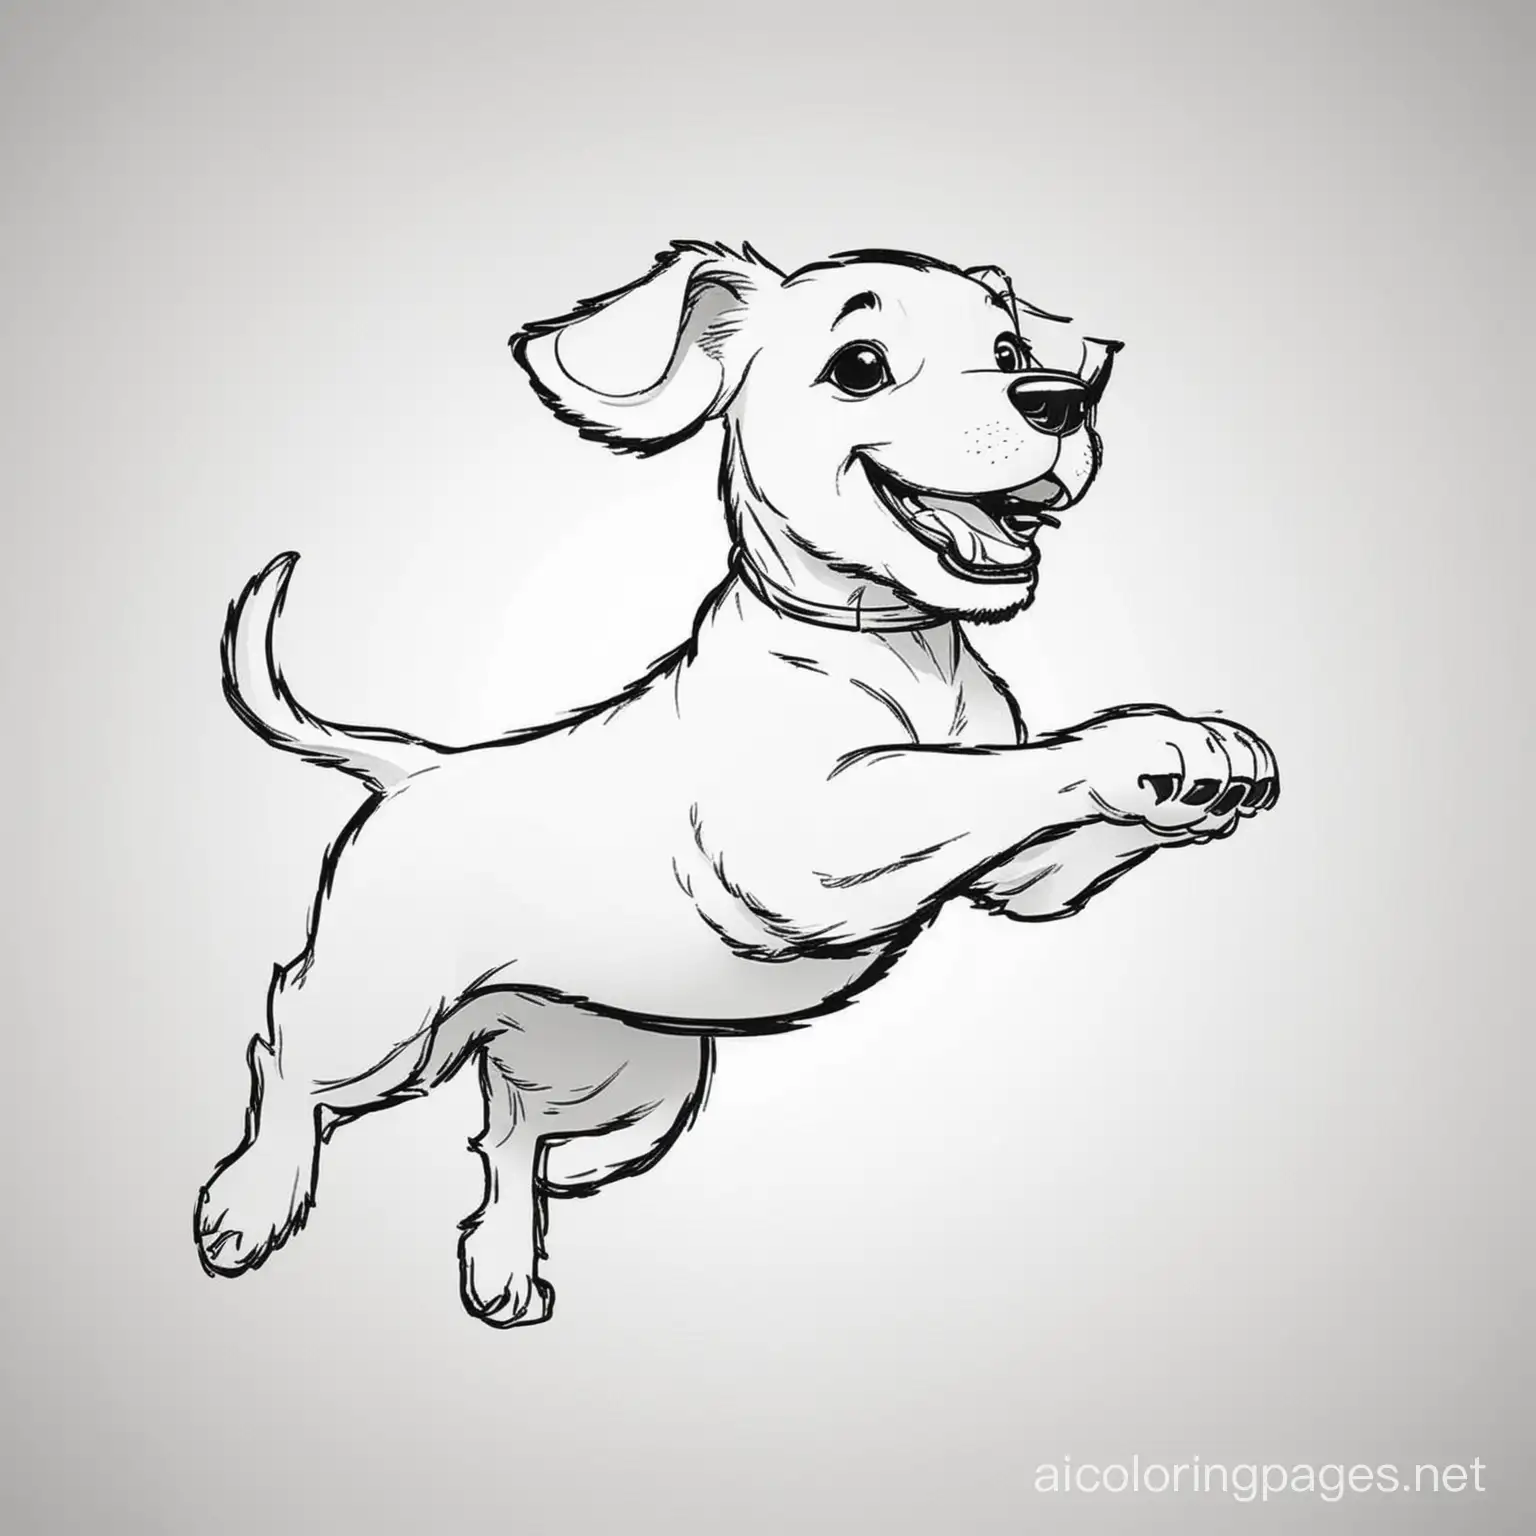 Playful-Dog-Coloring-Page-Simple-Line-Art-on-White-Background